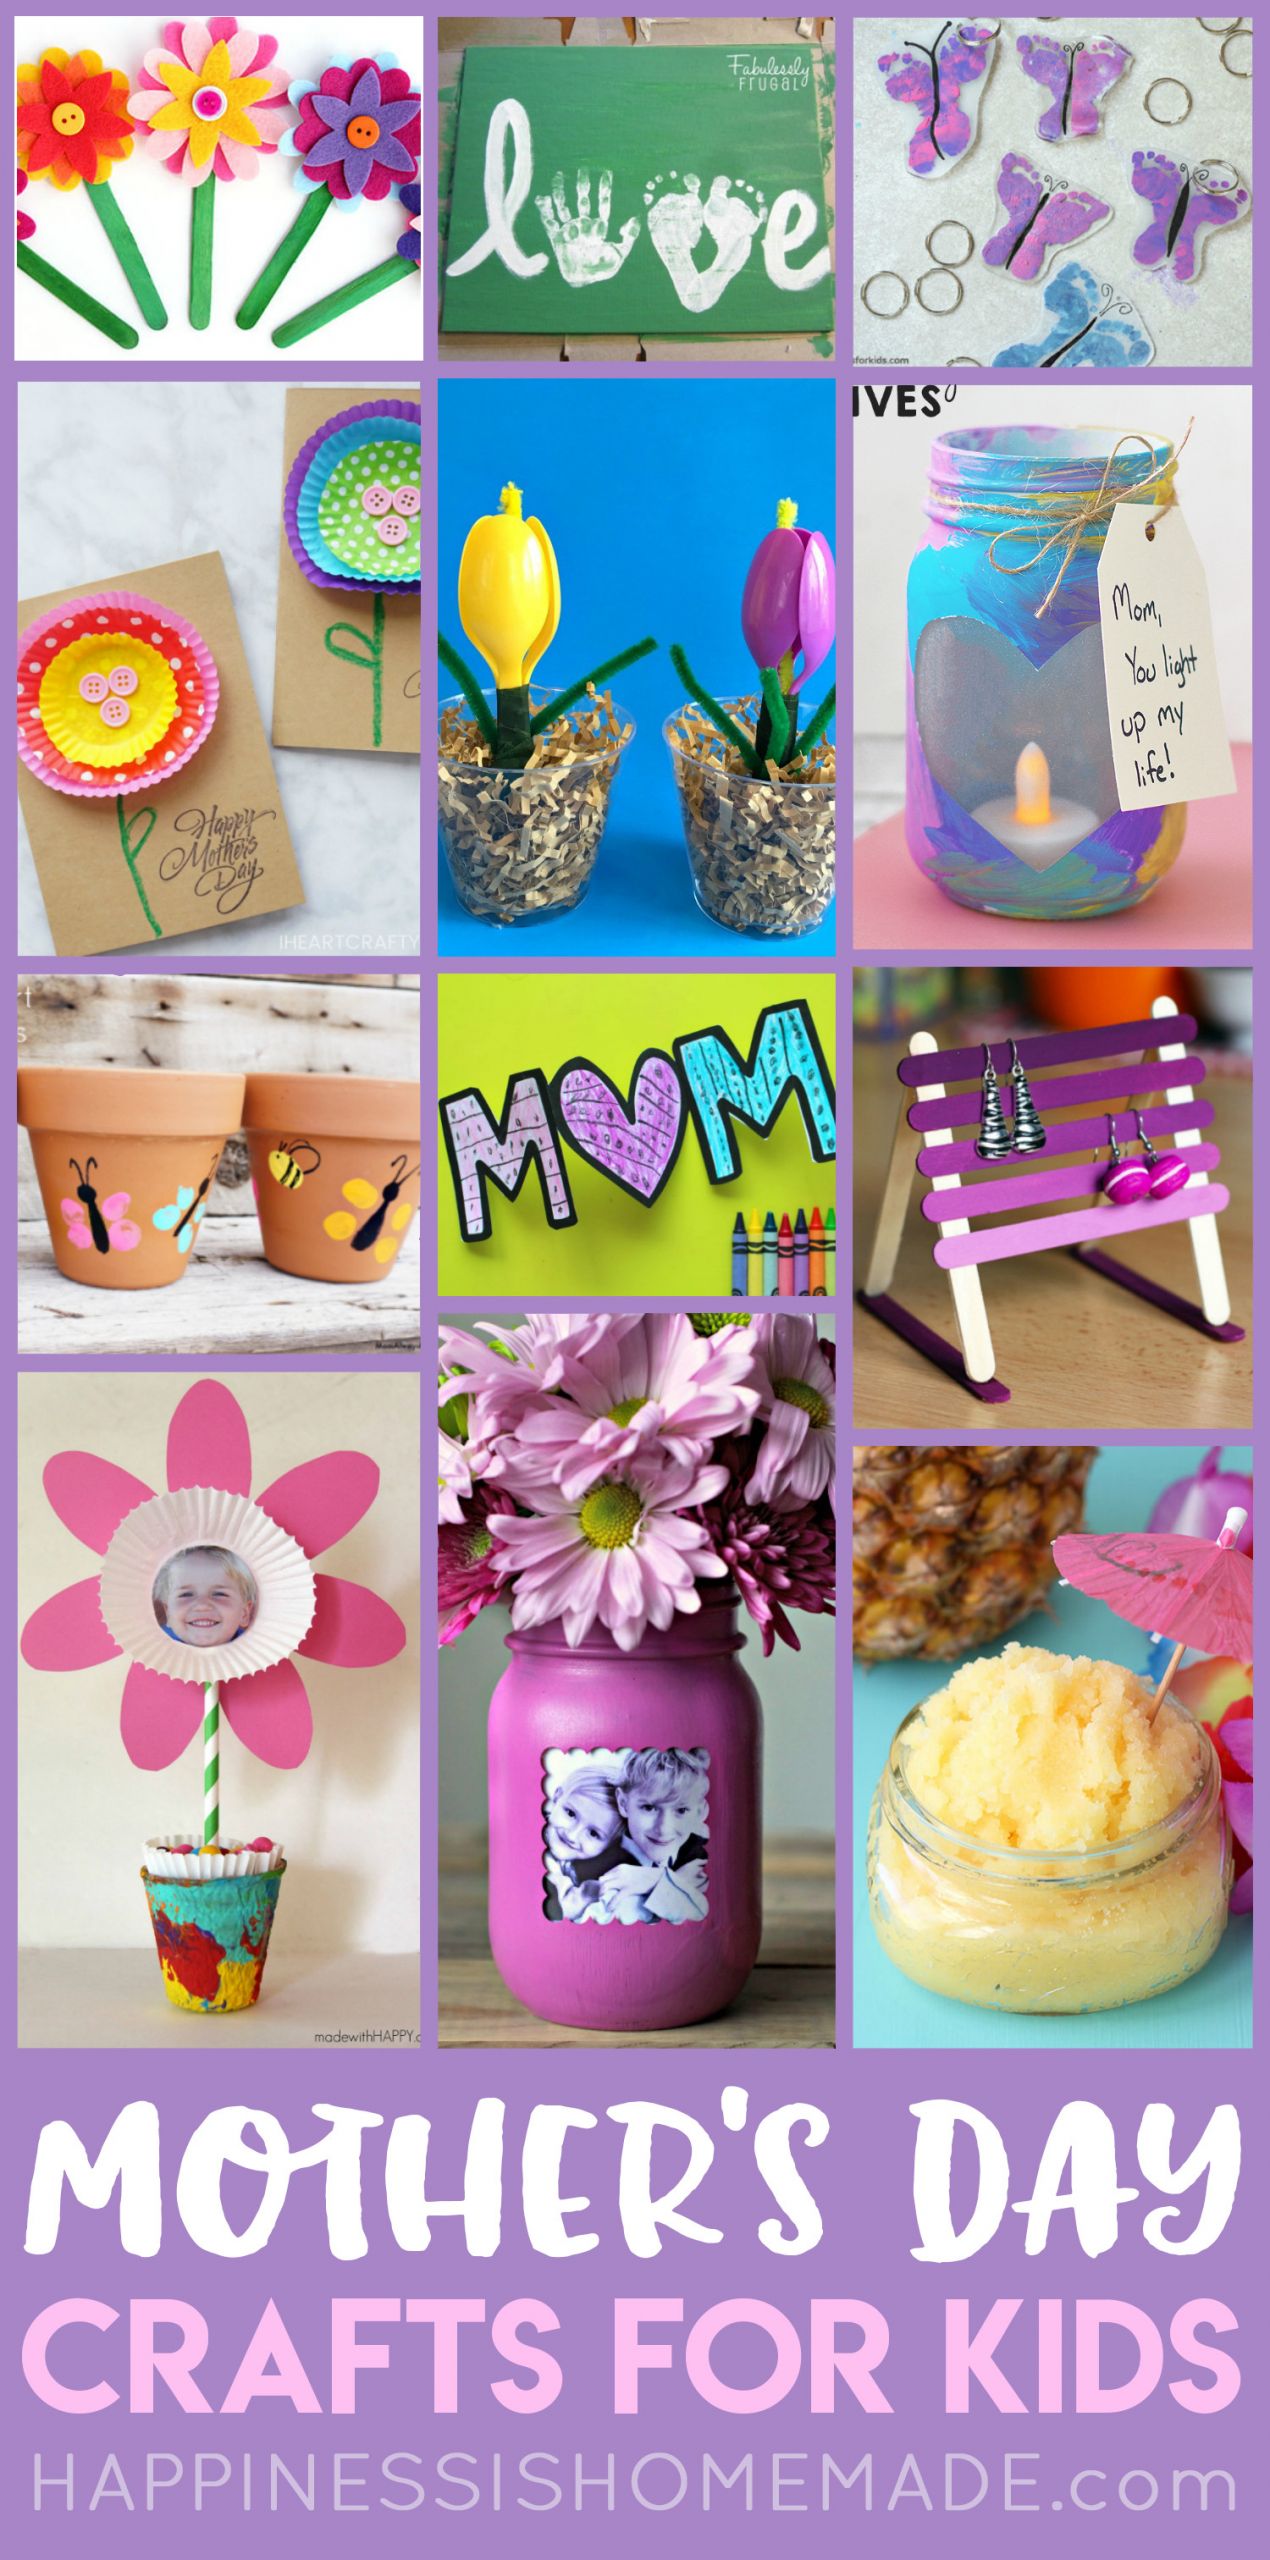 20 Of the Best Ideas for Diy Mothers Day Gifts From Kids Home, Family